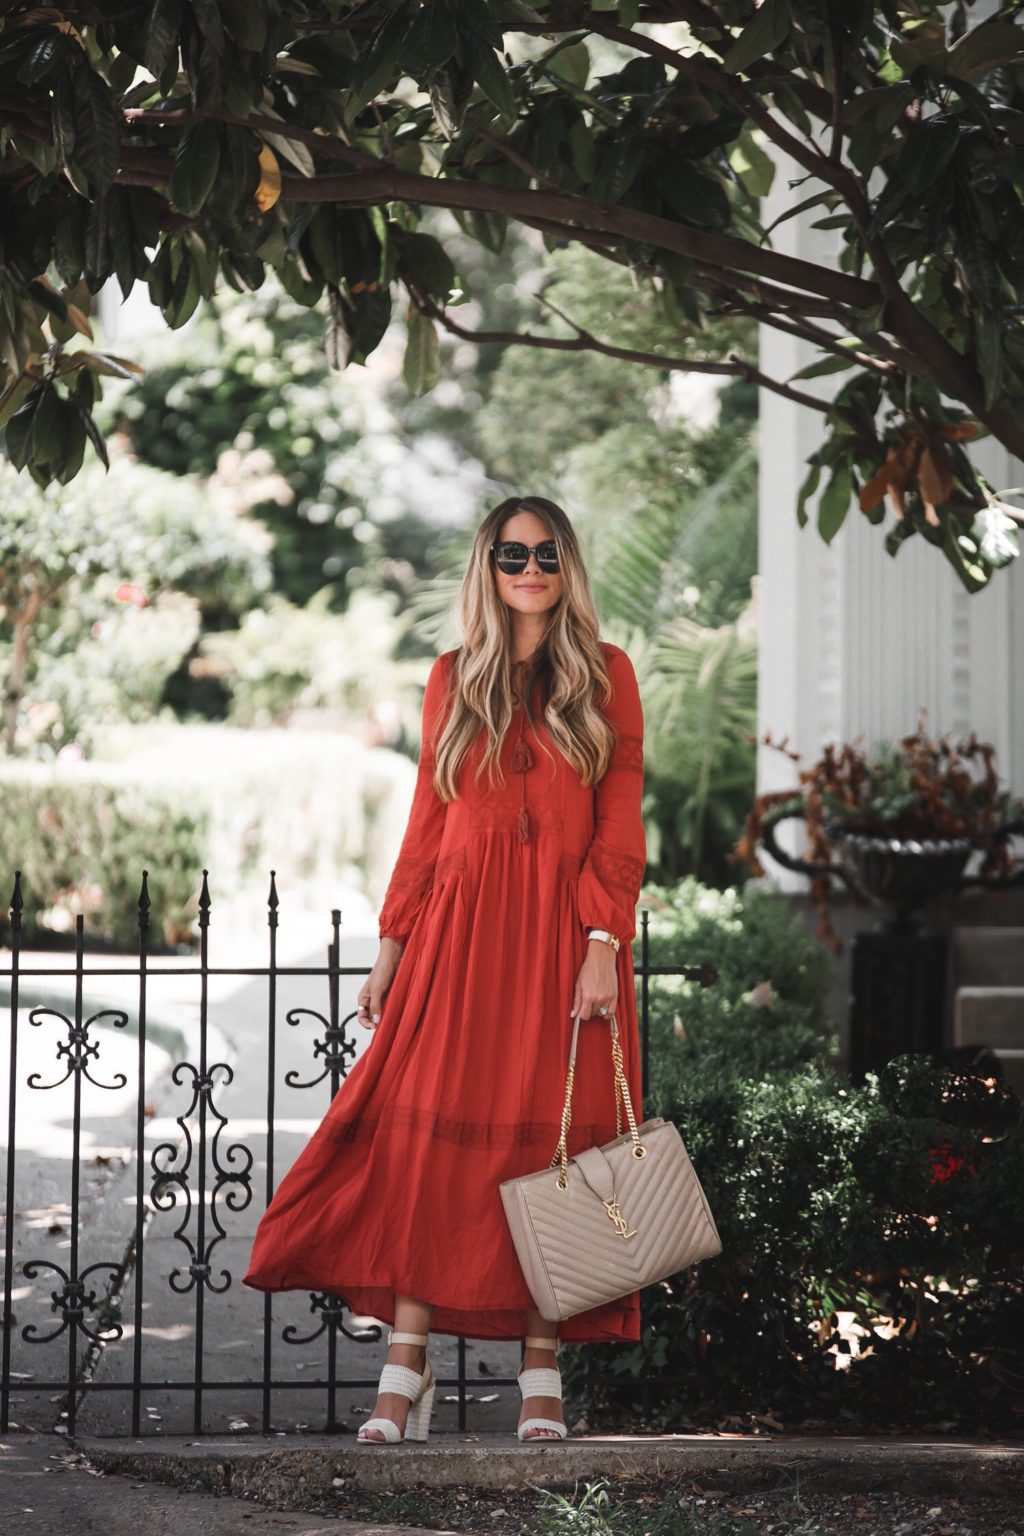 I Don’t Wear Red, But This Maxi Dress Changed My Mind